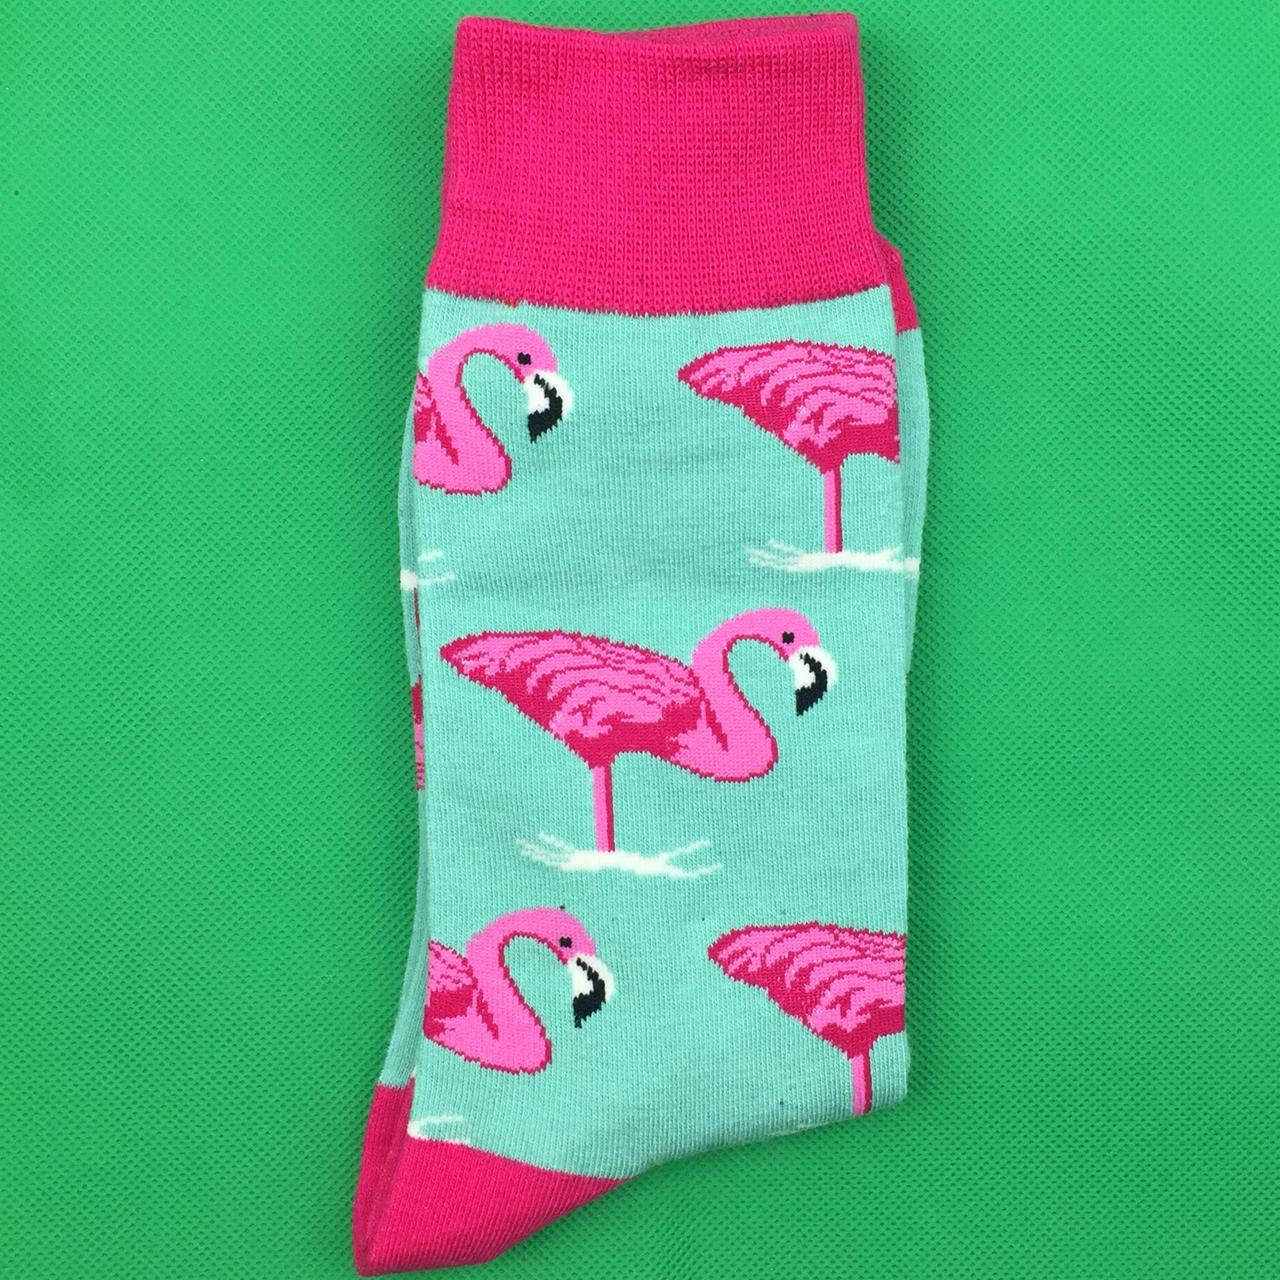 NEW Cute Pink Flamingo Trainer Socks 💓 Available Now... - Depop